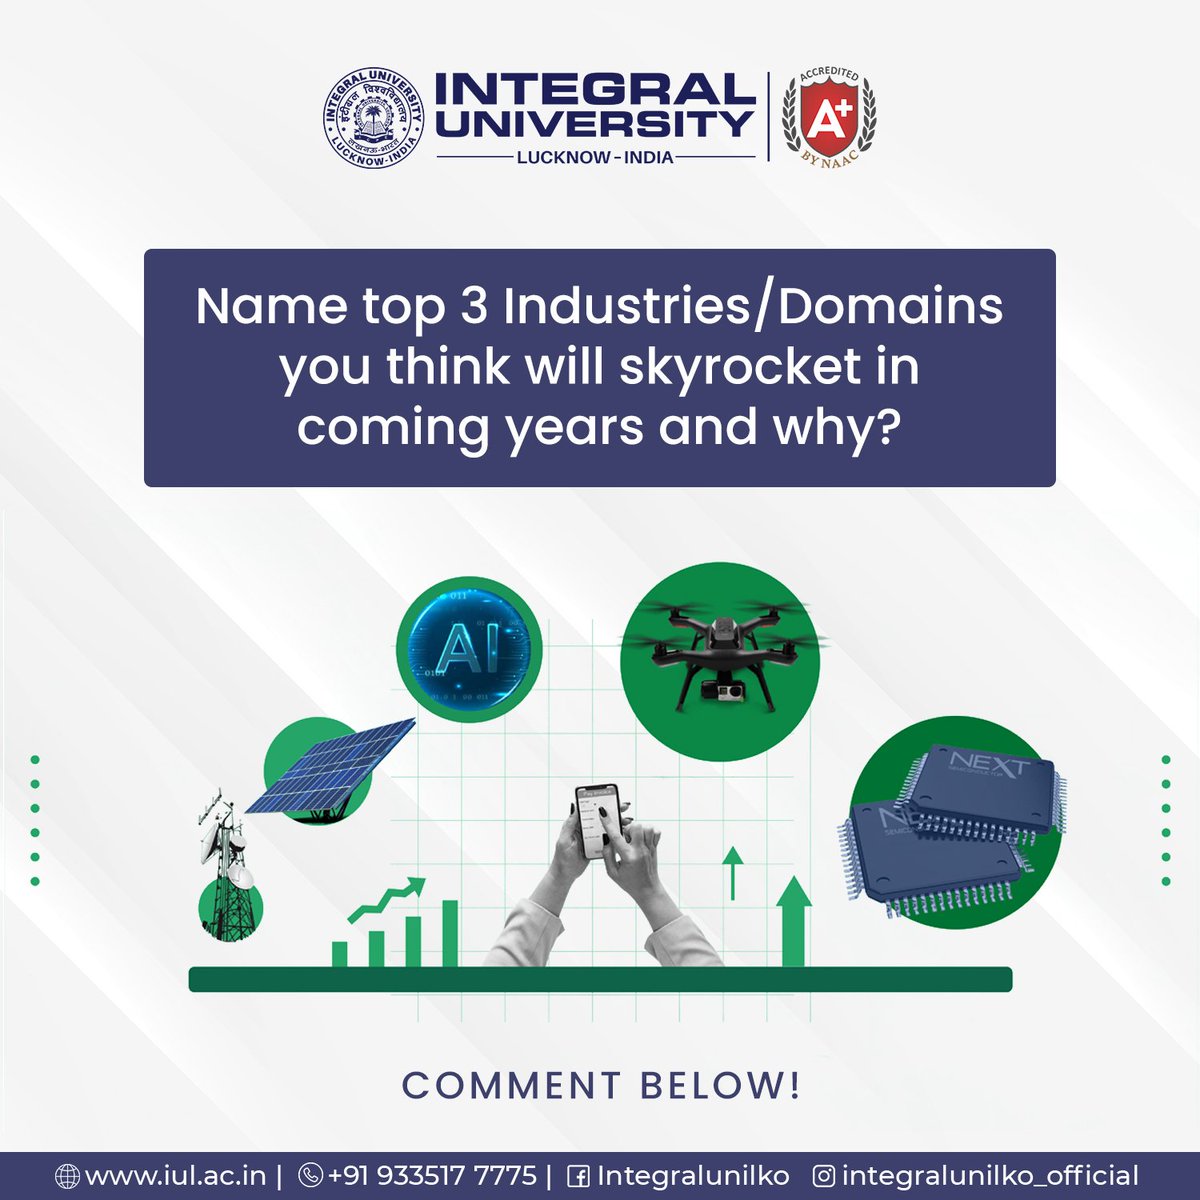 Predict the future and join the conversation! 🚀 
Share your insights on the top 3 industries or domains you believe will skyrocket in the coming years and tell us why. 
.
.
.
#FutureTrends #IndustryInsights #Predictions #TechTrends #BusinessForecast #Innovation #EconomicGrowth